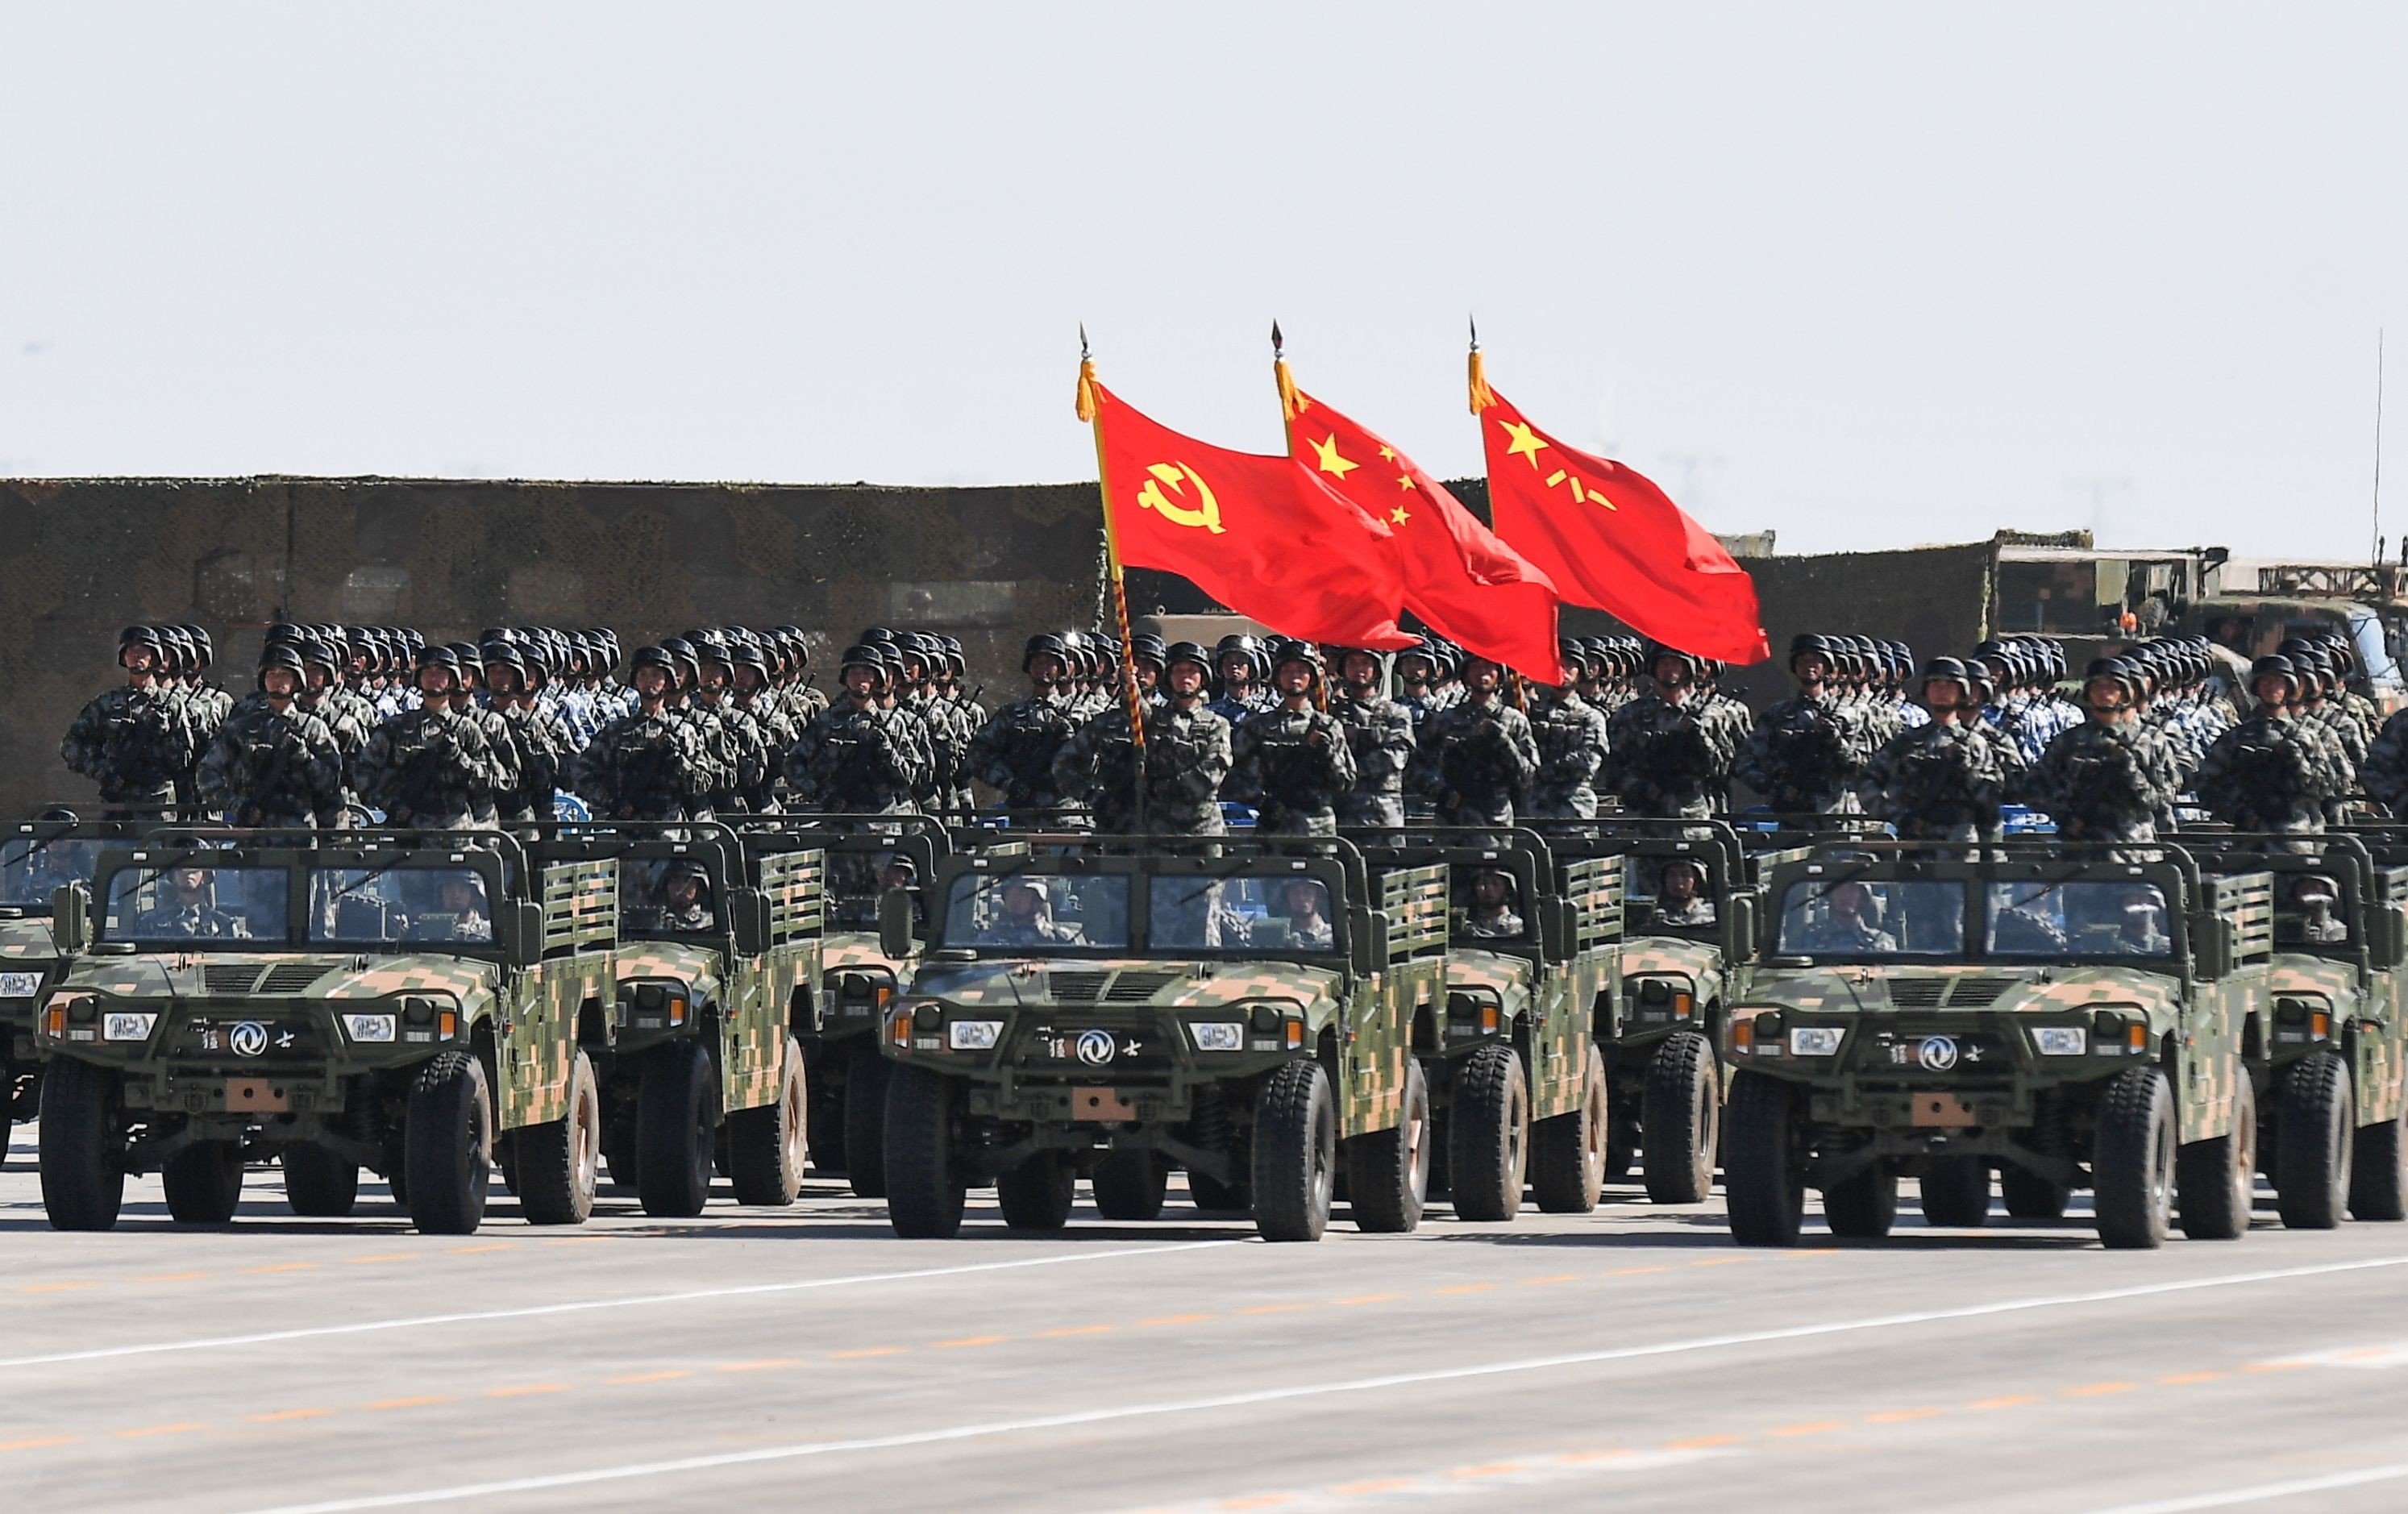 President Xi Jinping’s anti-corruption crackdown has ensnared high-ranking military officials. Photo: AFP